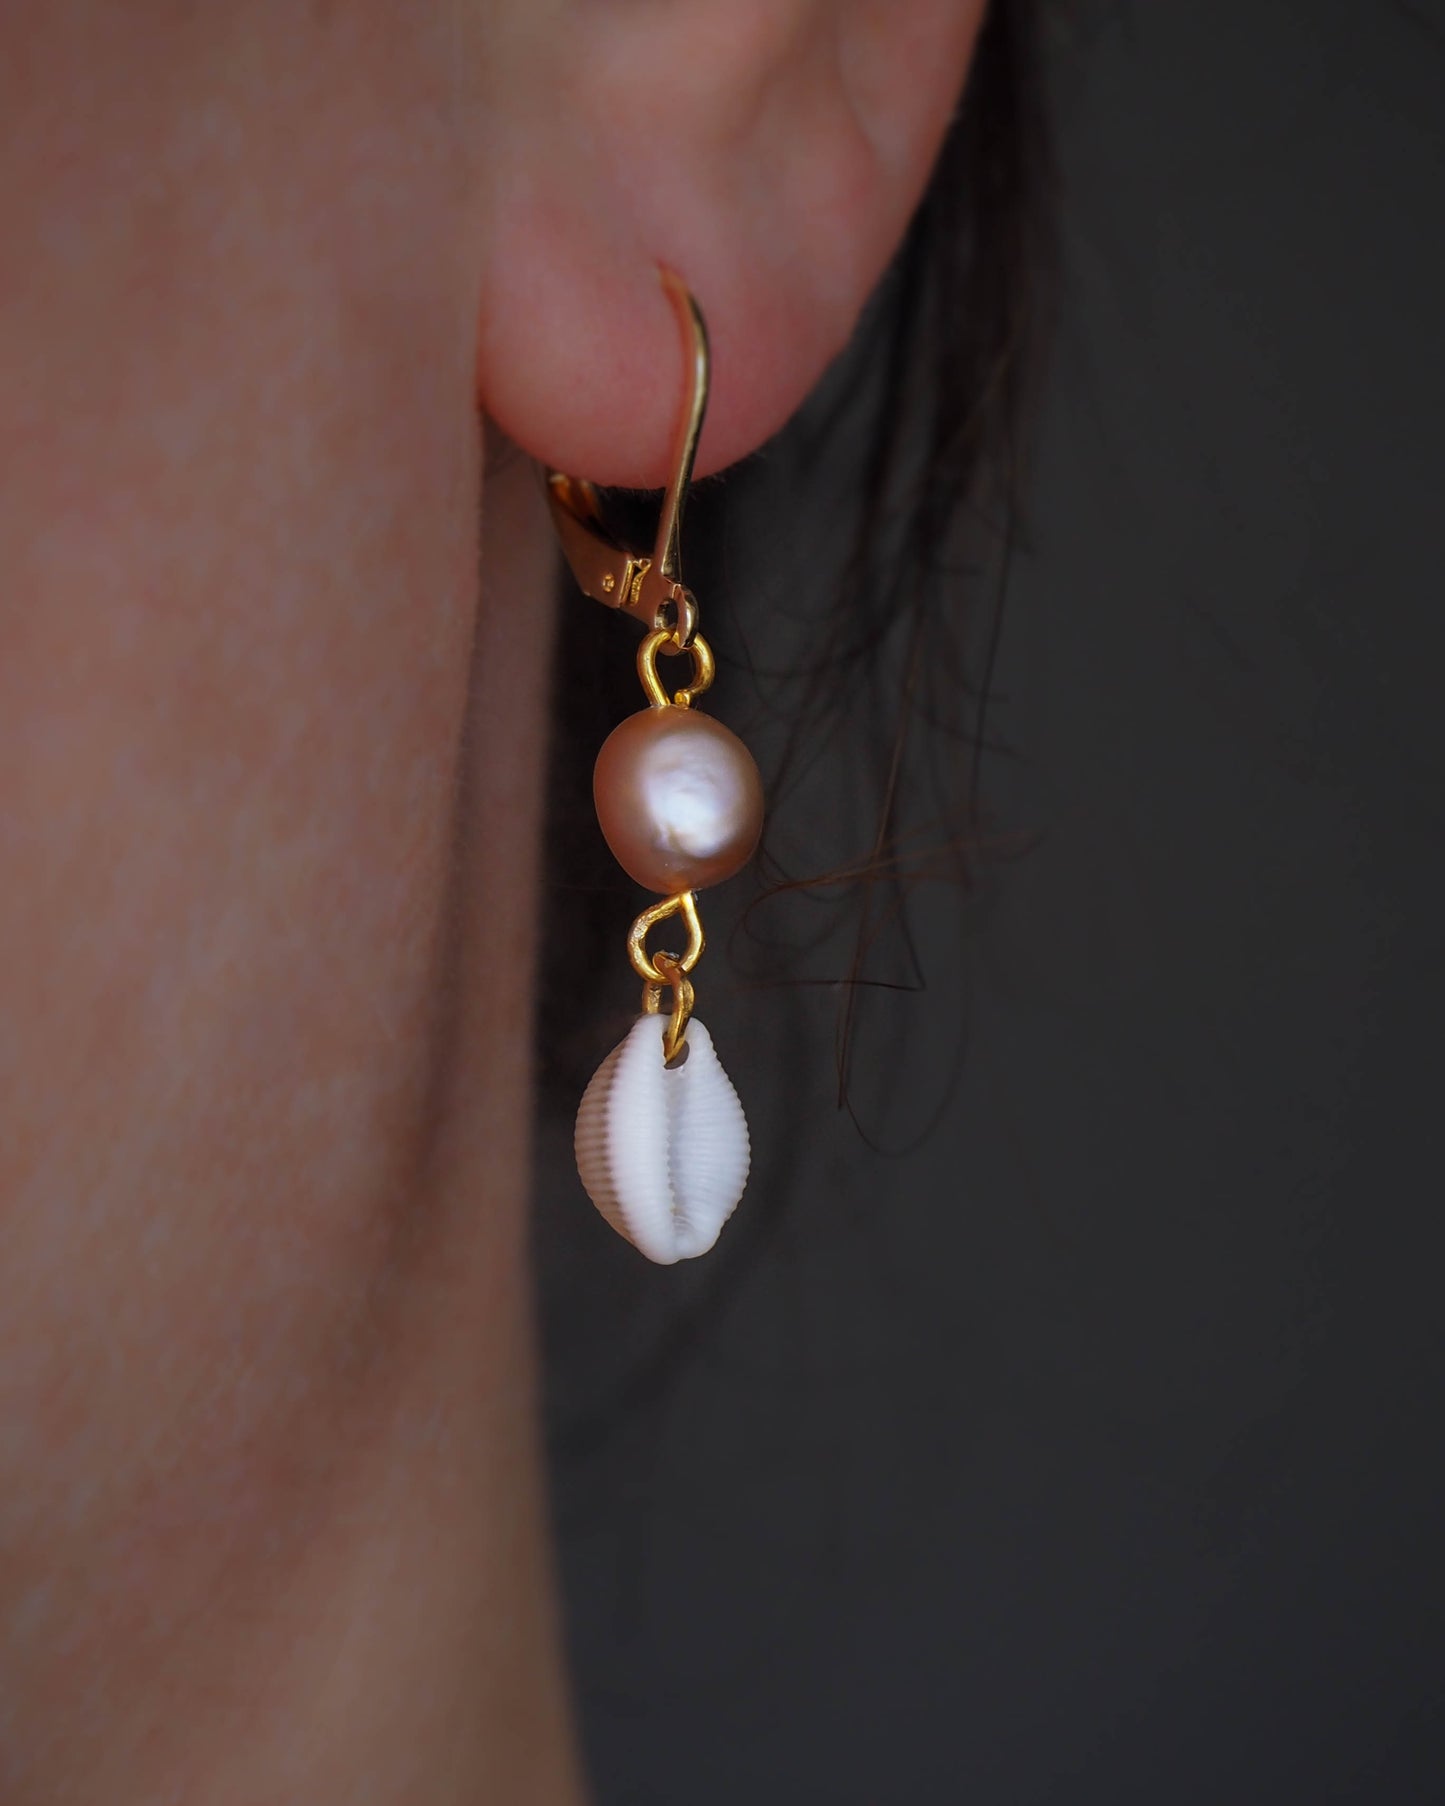 Cowrie Shell Earrings 24K Gold Plated Cowrie Seashell Earrings with Rose Freshwater Pearls, Handmade from Portugal, Real Seashells, Cowrie shell earrings, Shell earrings, Shell hoops, Cowrie Boho earrings, Summer earrings, Beach earrings, Beach jewelry, Minimal jewels